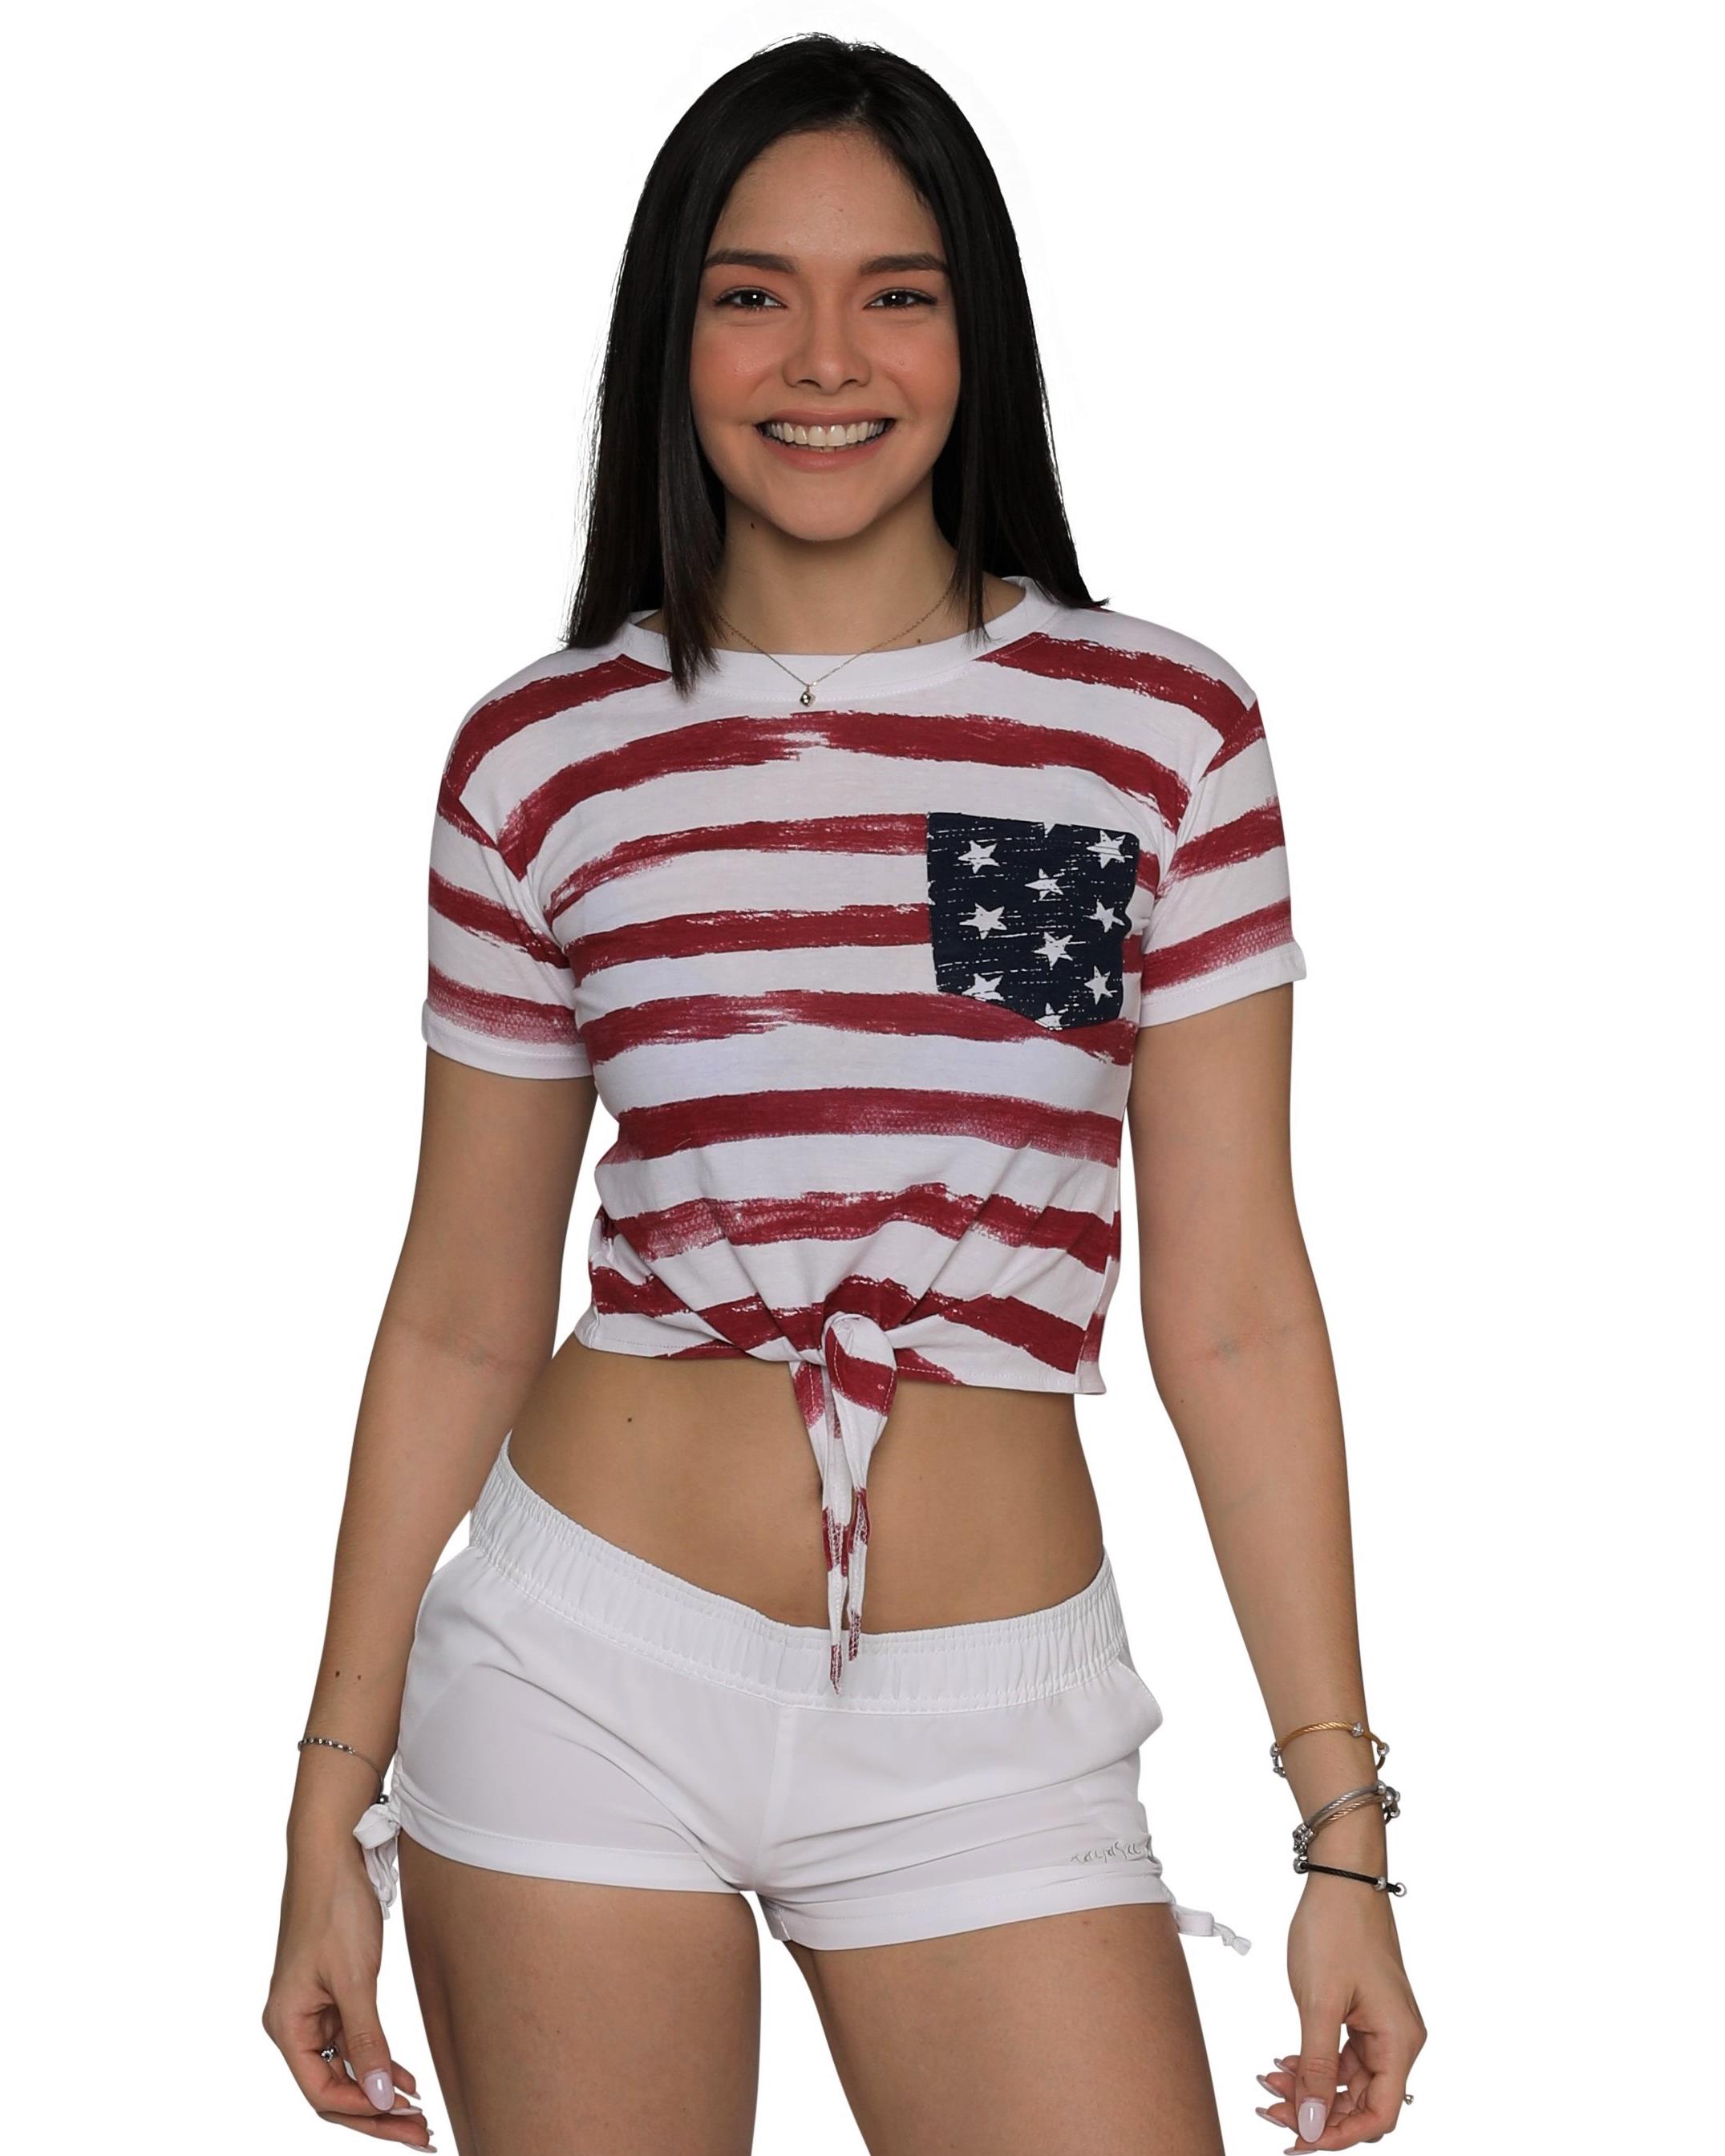 U.S. Vintage Knot Front Cuffed Sleeve / Sleeveless Stars and Stripes Crop Top Tee USA Patriotic T-Shirt, Stripes, Size: X-Small - image 1 of 2